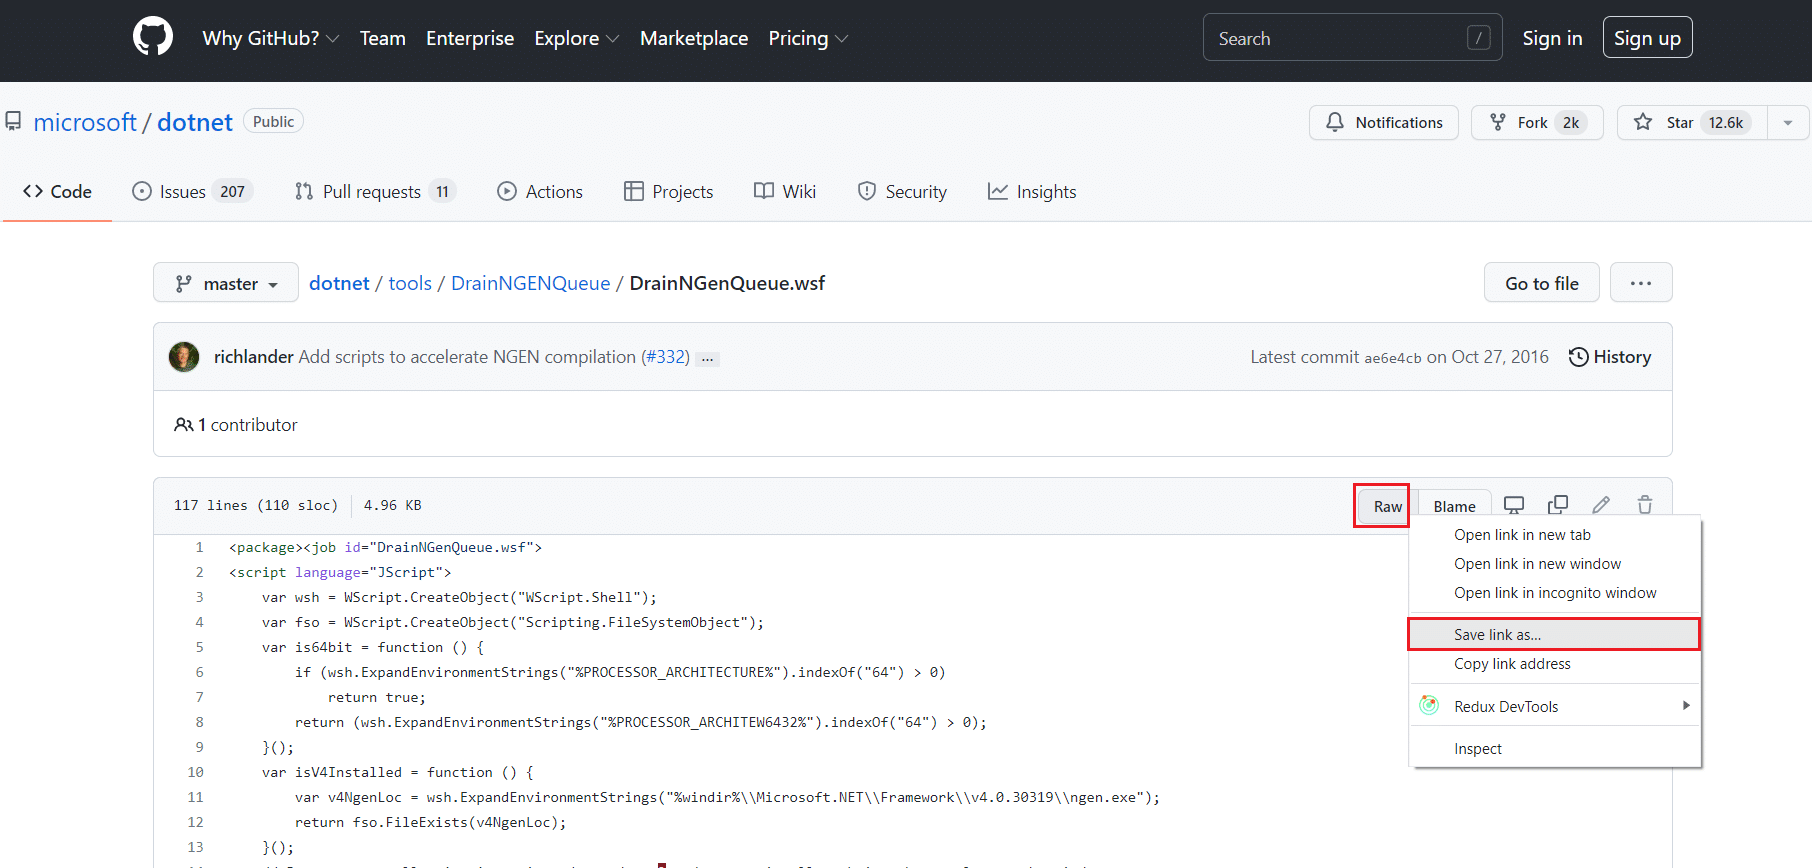 right click on Raw option and select Save link as... in github page